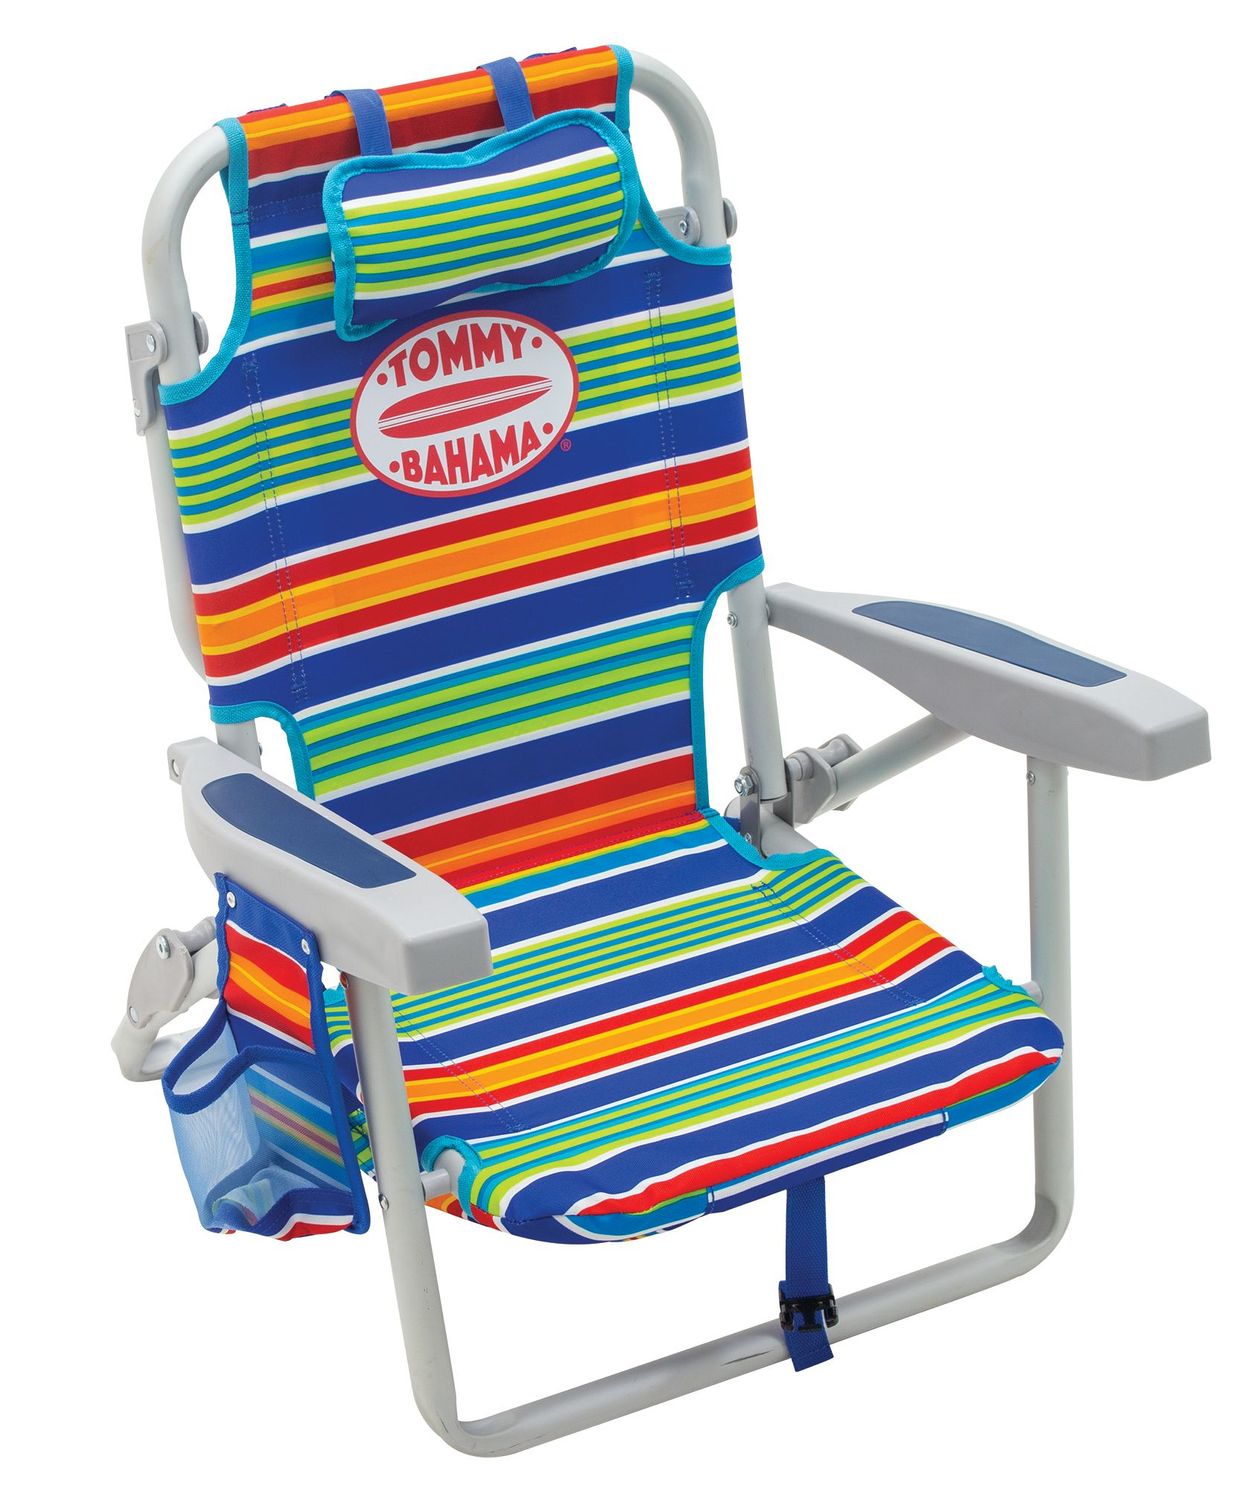 NWT TOMMY BAHAMA KIDS Folding Beach Chair w// Umbrella Surfing Sharks Ages 3-6